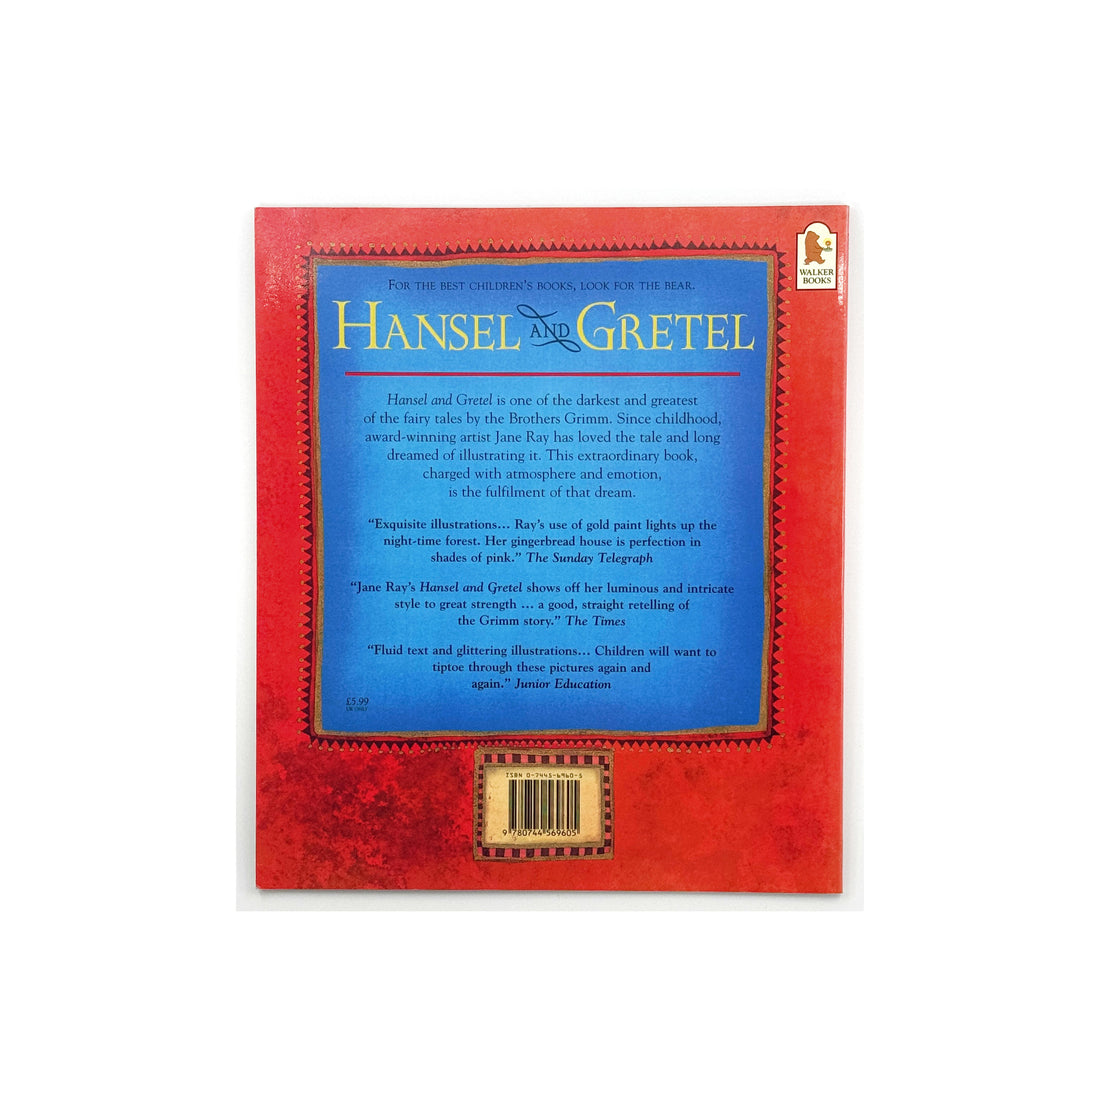 Hansel and Gretel by Brothers Grimm, Retold and Illustrated by Jane Ray